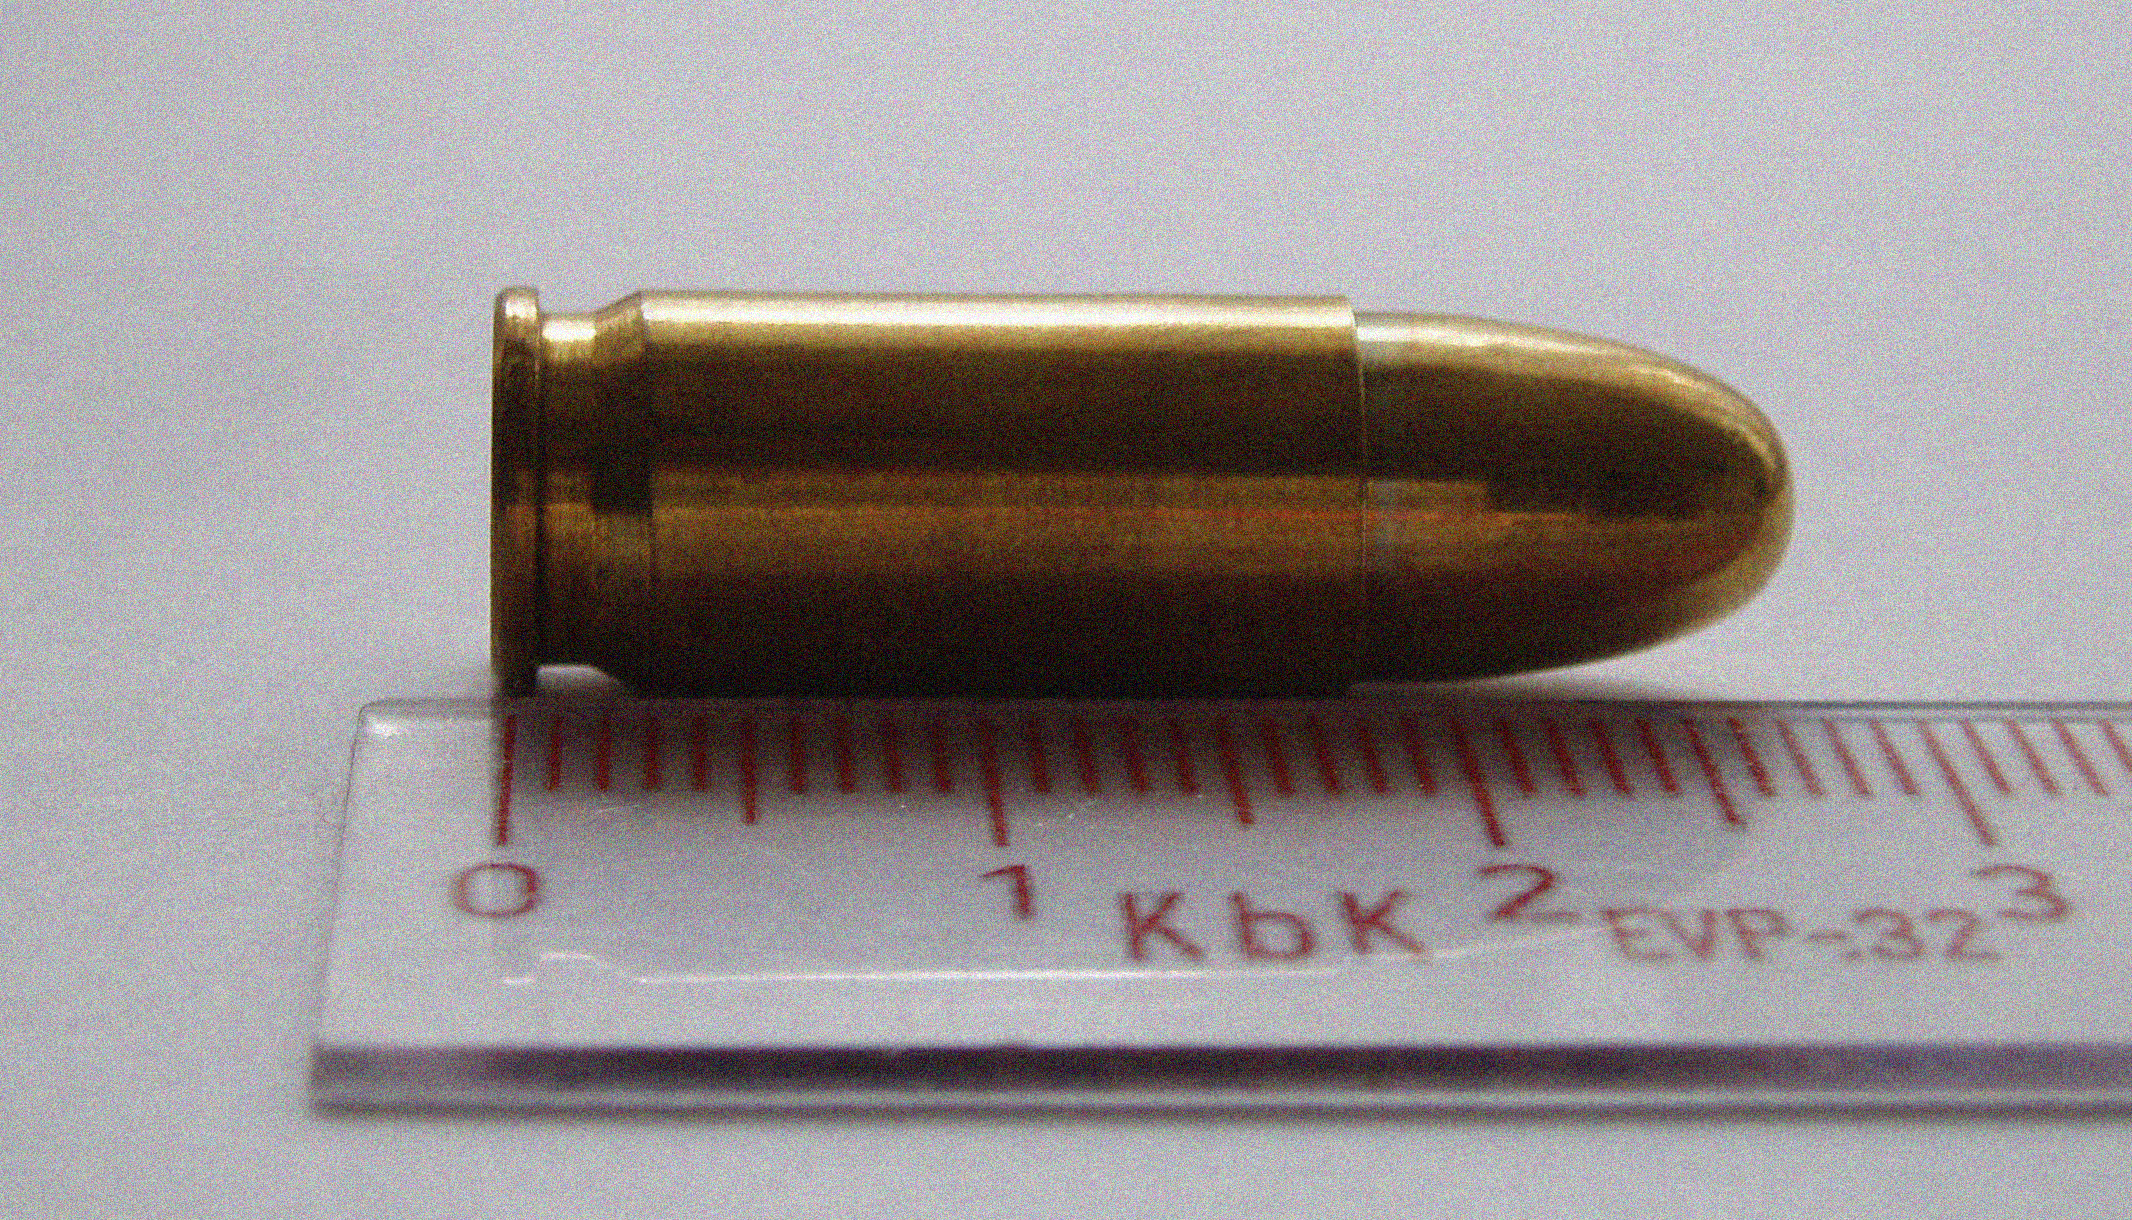 What is the difference between mm and caliber?